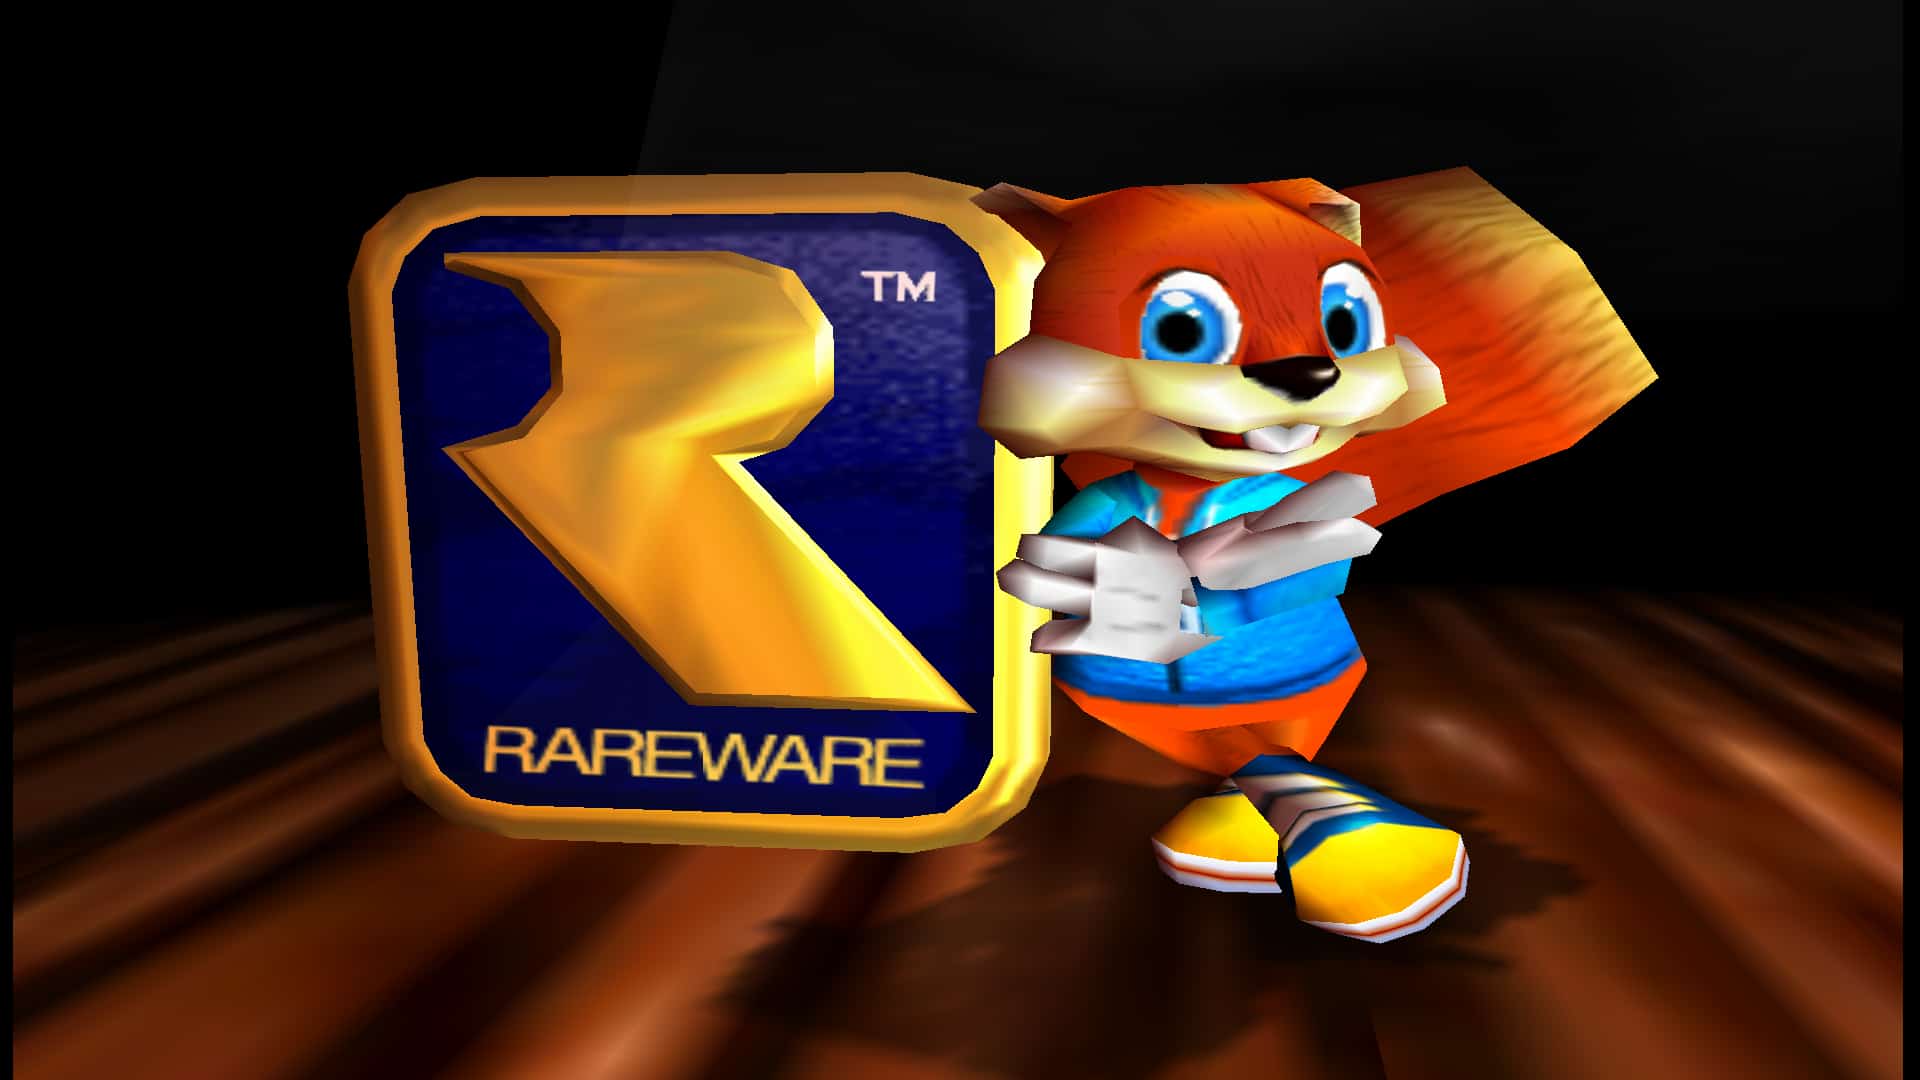 An in-game screenshot from Conker's Bad Fur Day.